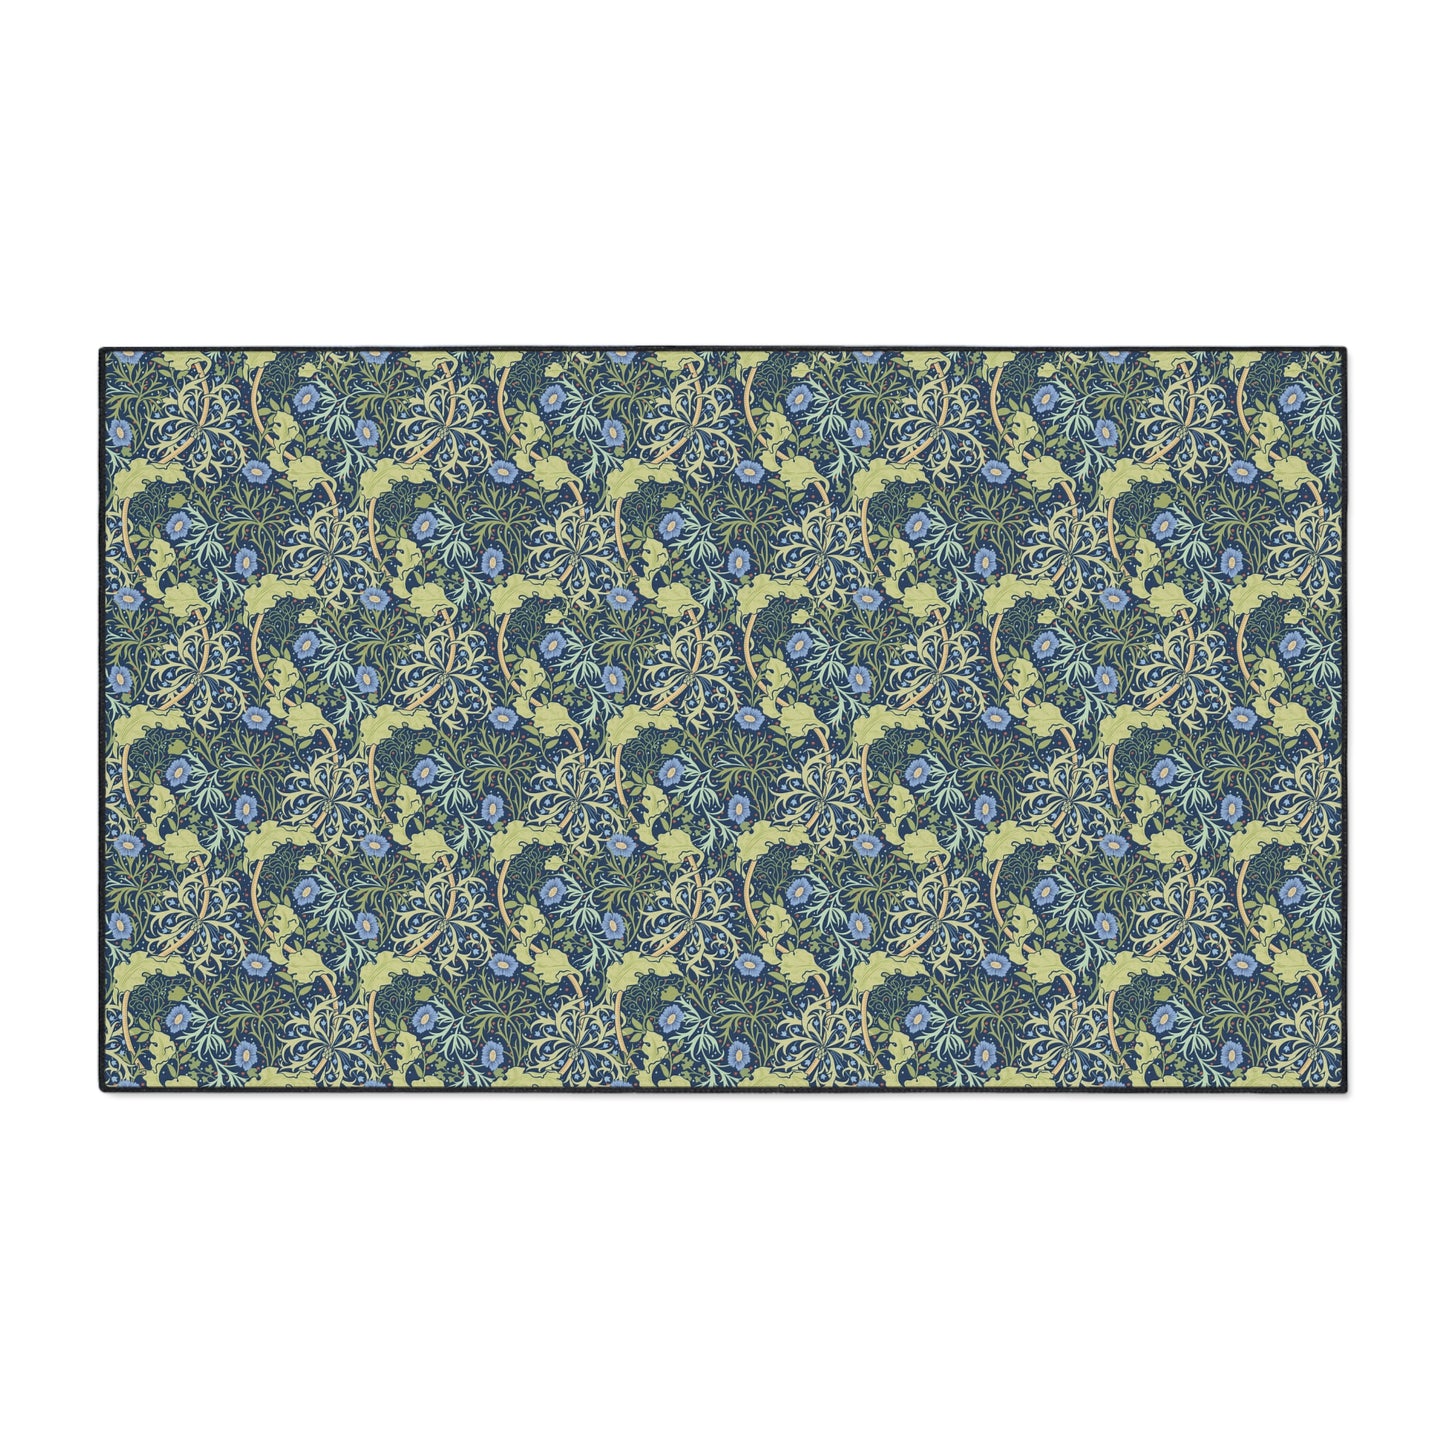 william-morris-co-heavy-duty-floor-mat-seaweed-collection-blue-flowers-4